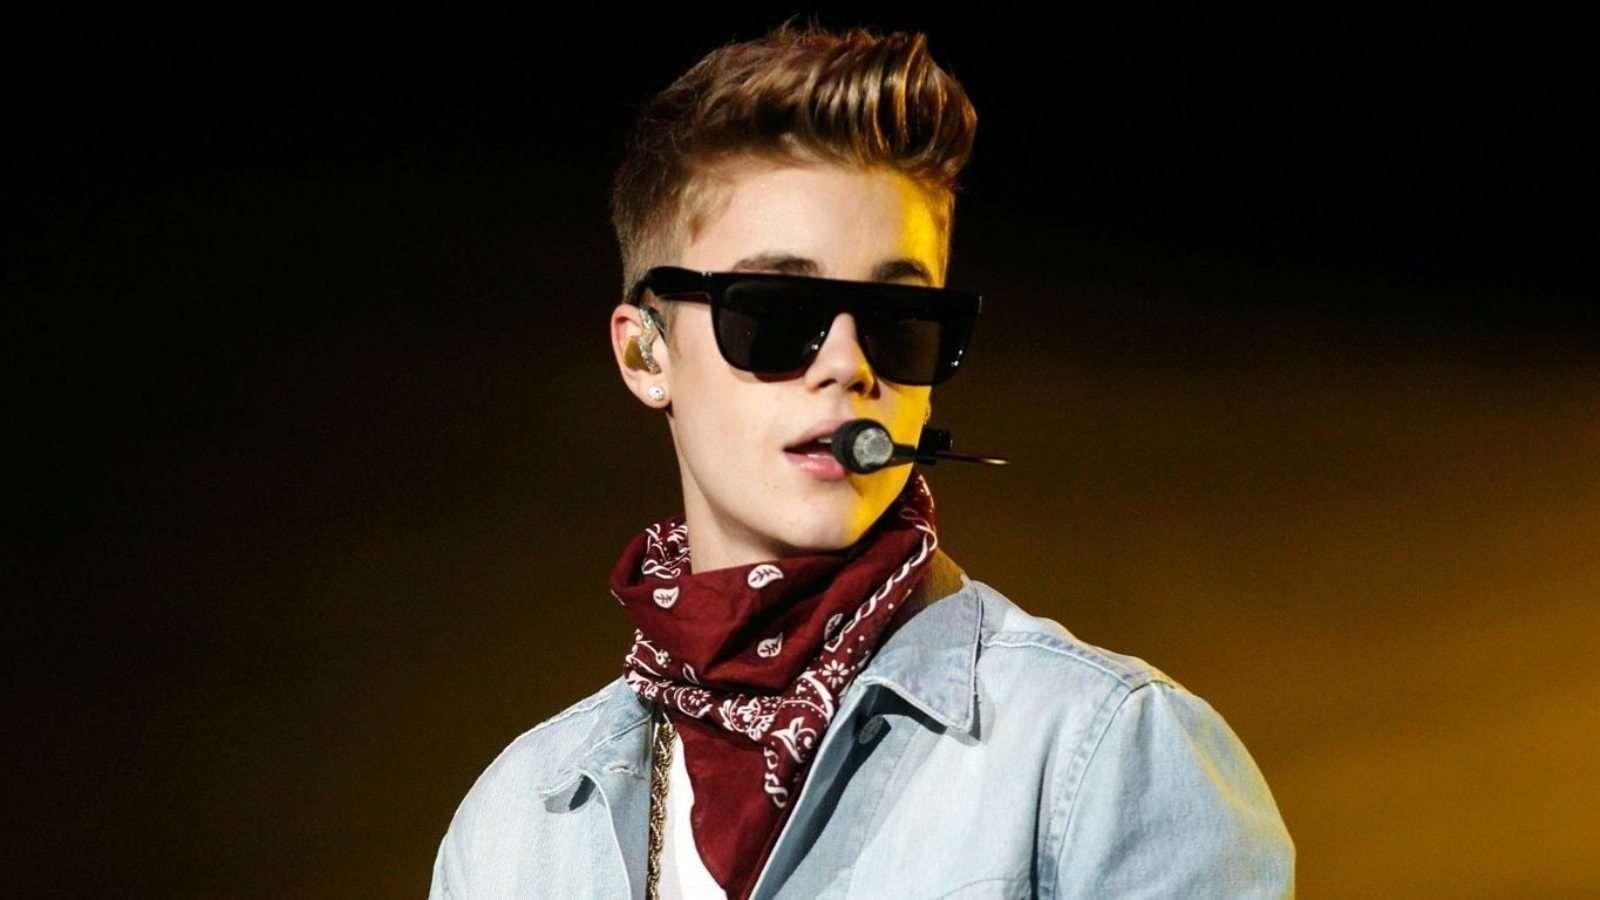 Justin Bieber New Wallpapers 2017 Wallpapers Cave Justin Bieber